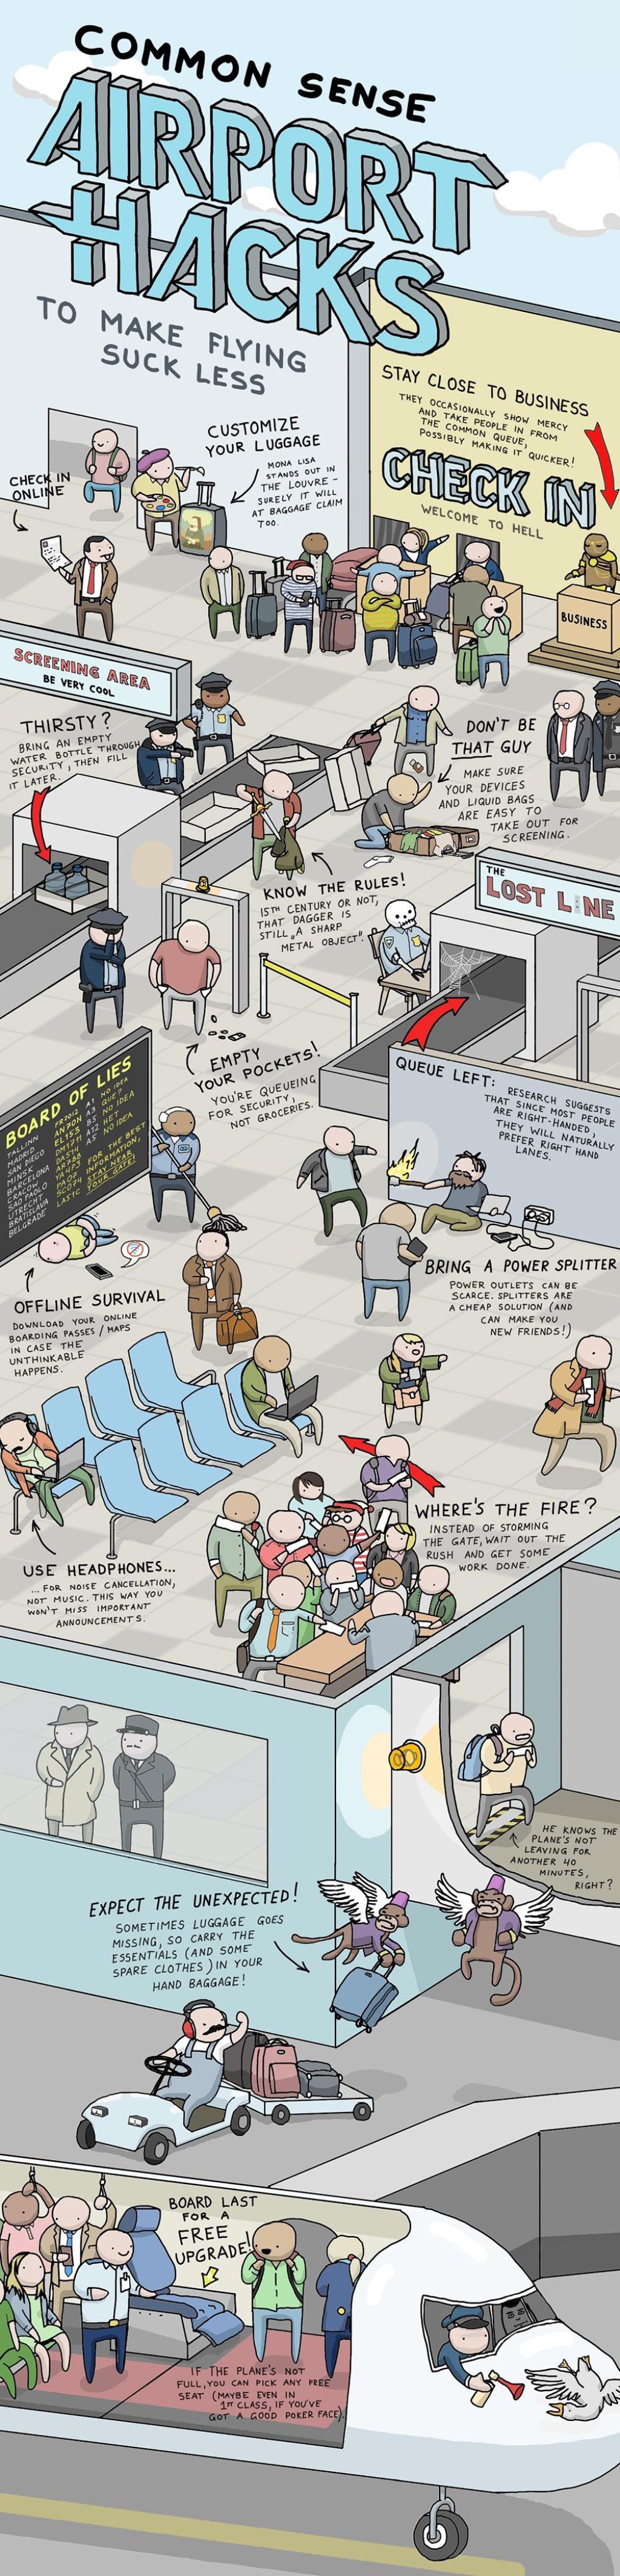 Picture of: Airport life hacks : r/coolguides